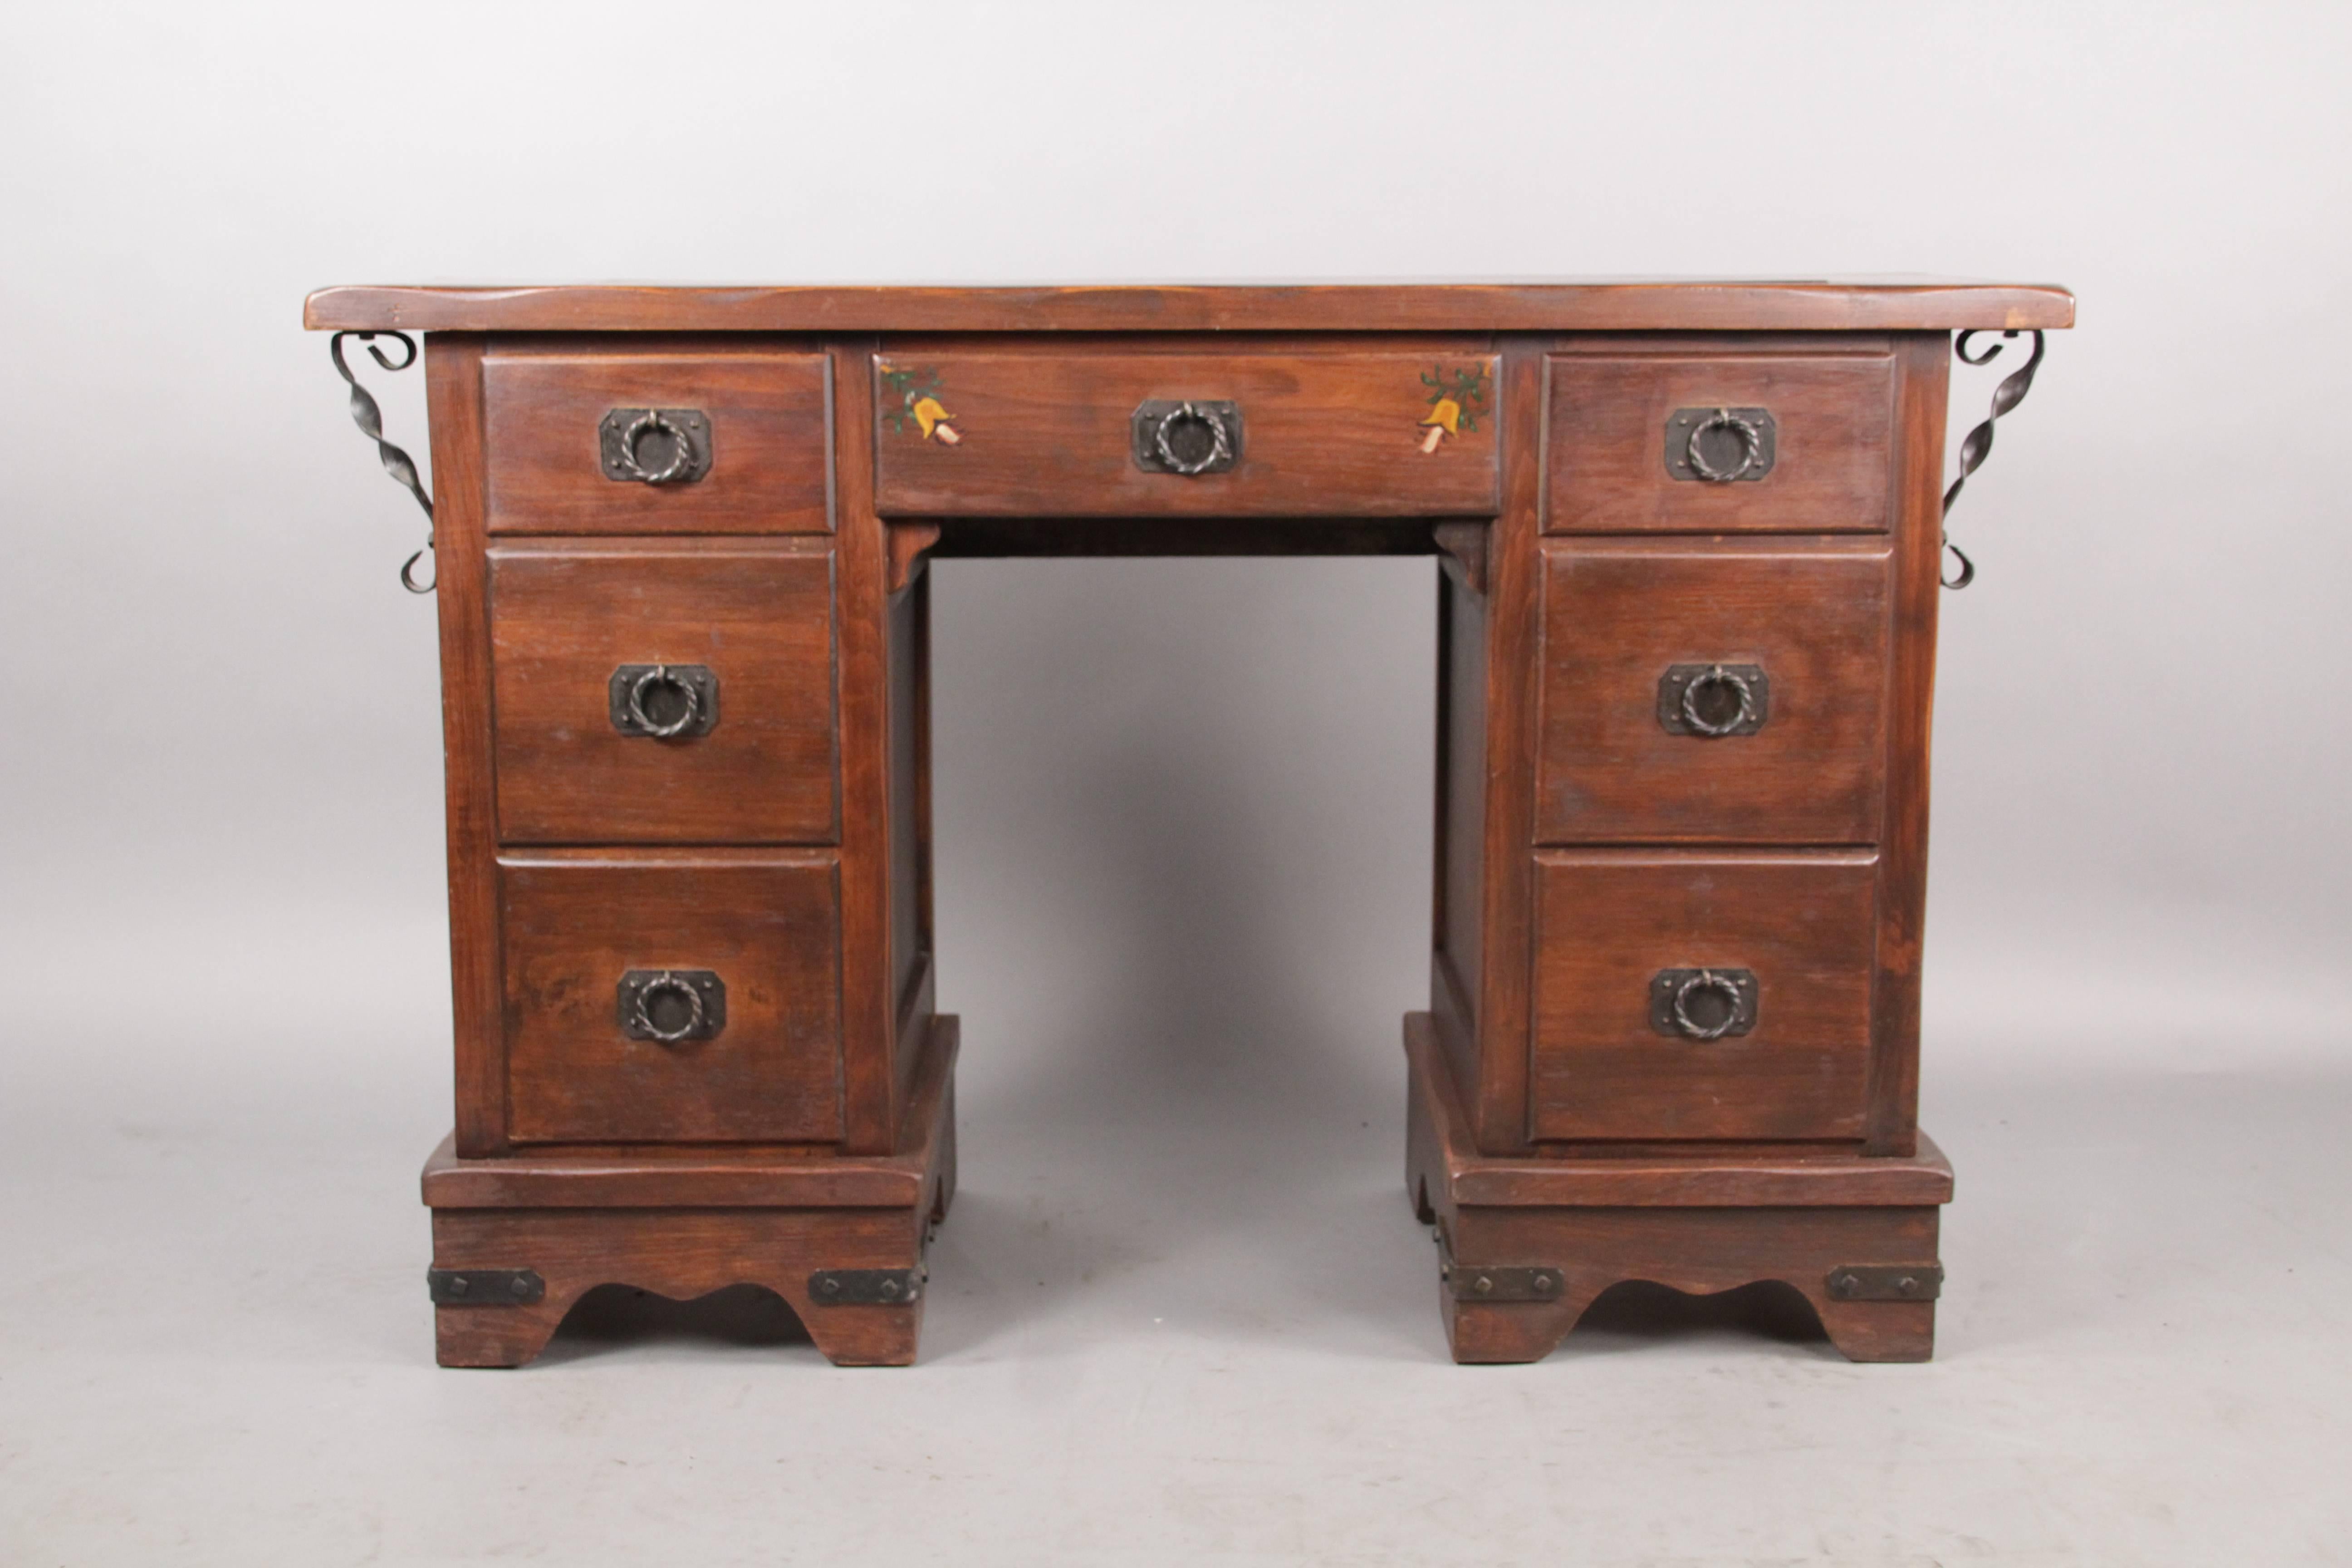 Seven drawer desk with iron detailing and painted detailing, circa 1920s. Retains its original label.